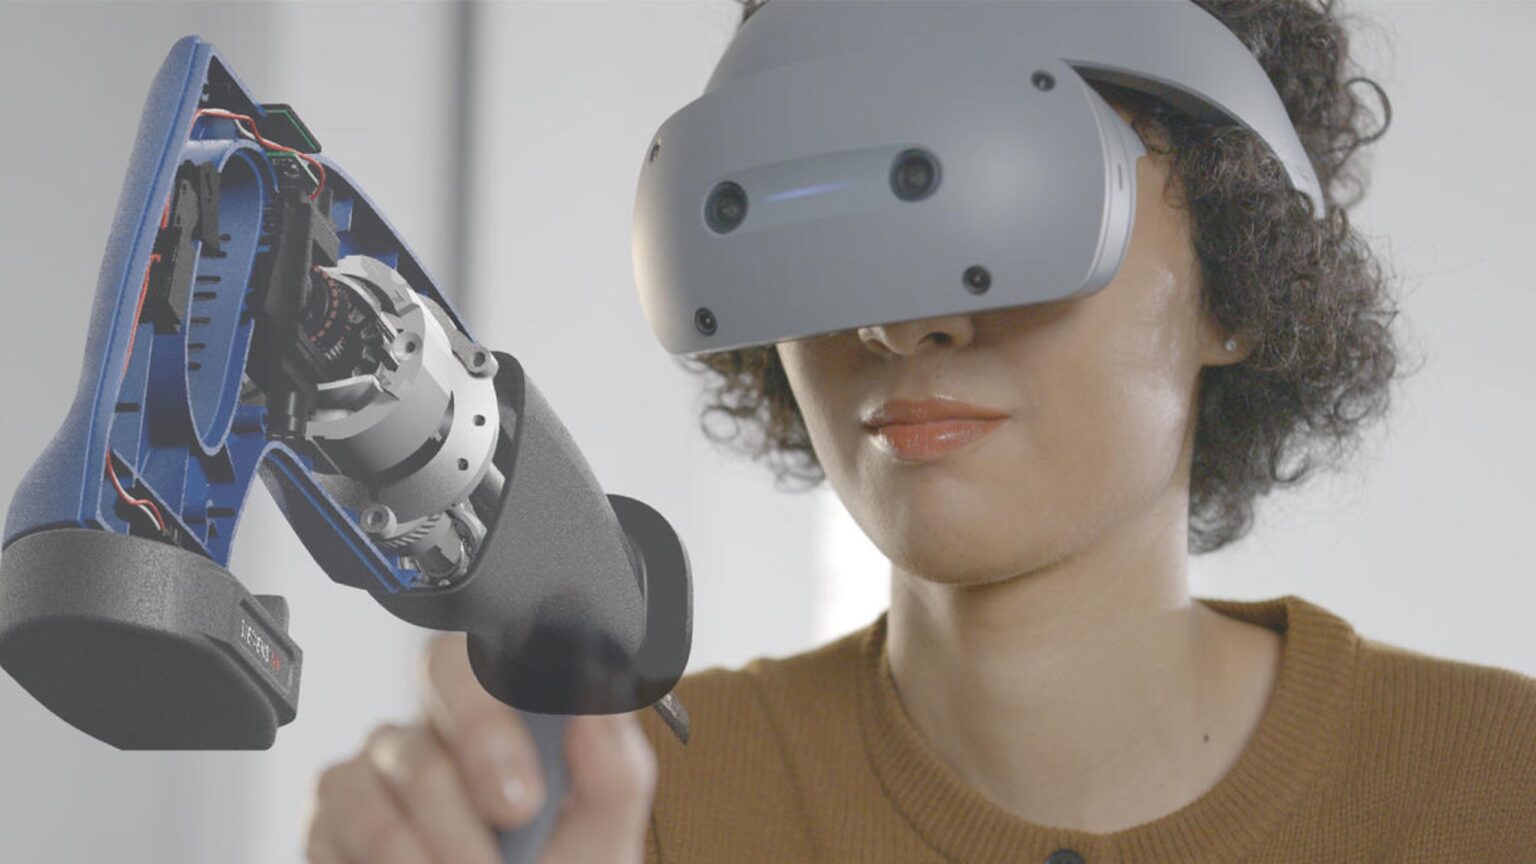 Sony Focuses on 3D Content Creation with Its Latest Mixed Reality Device